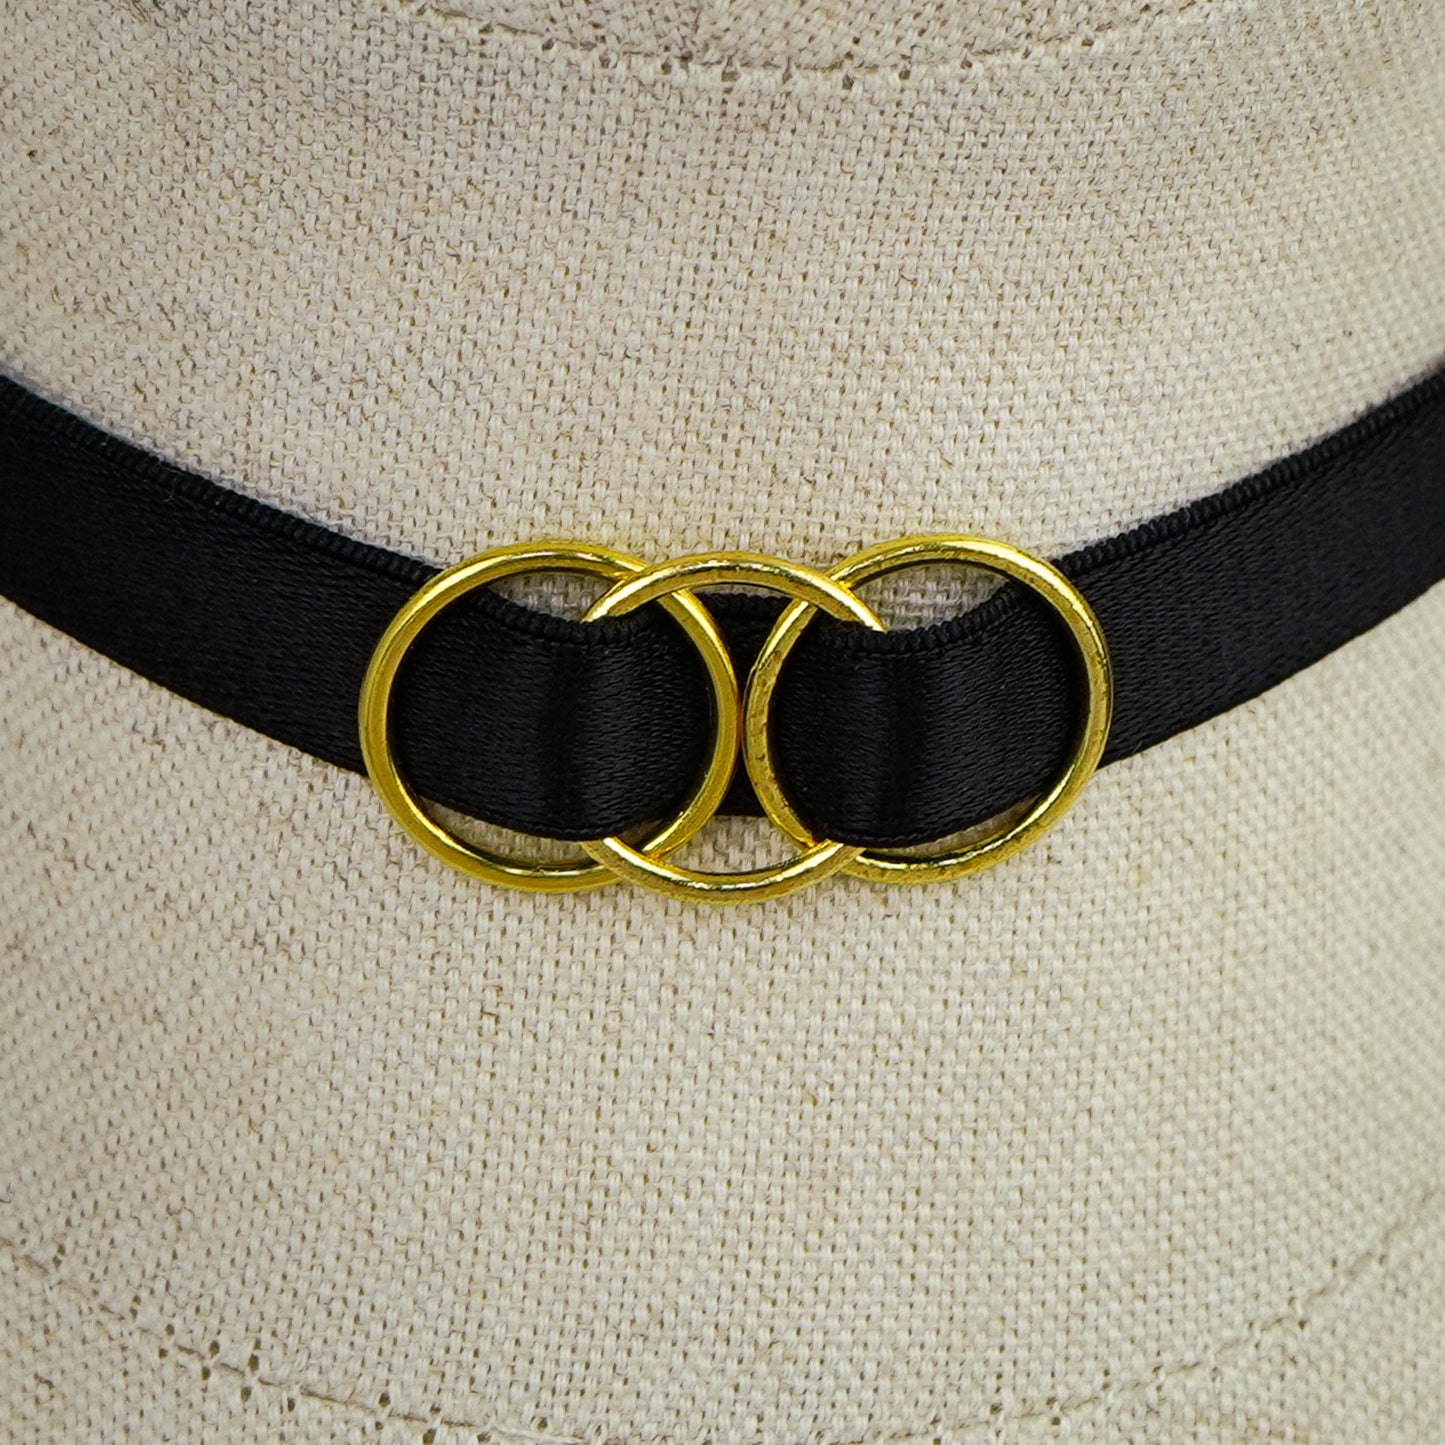 Telyn choker with gold triple interlocking rings in close up